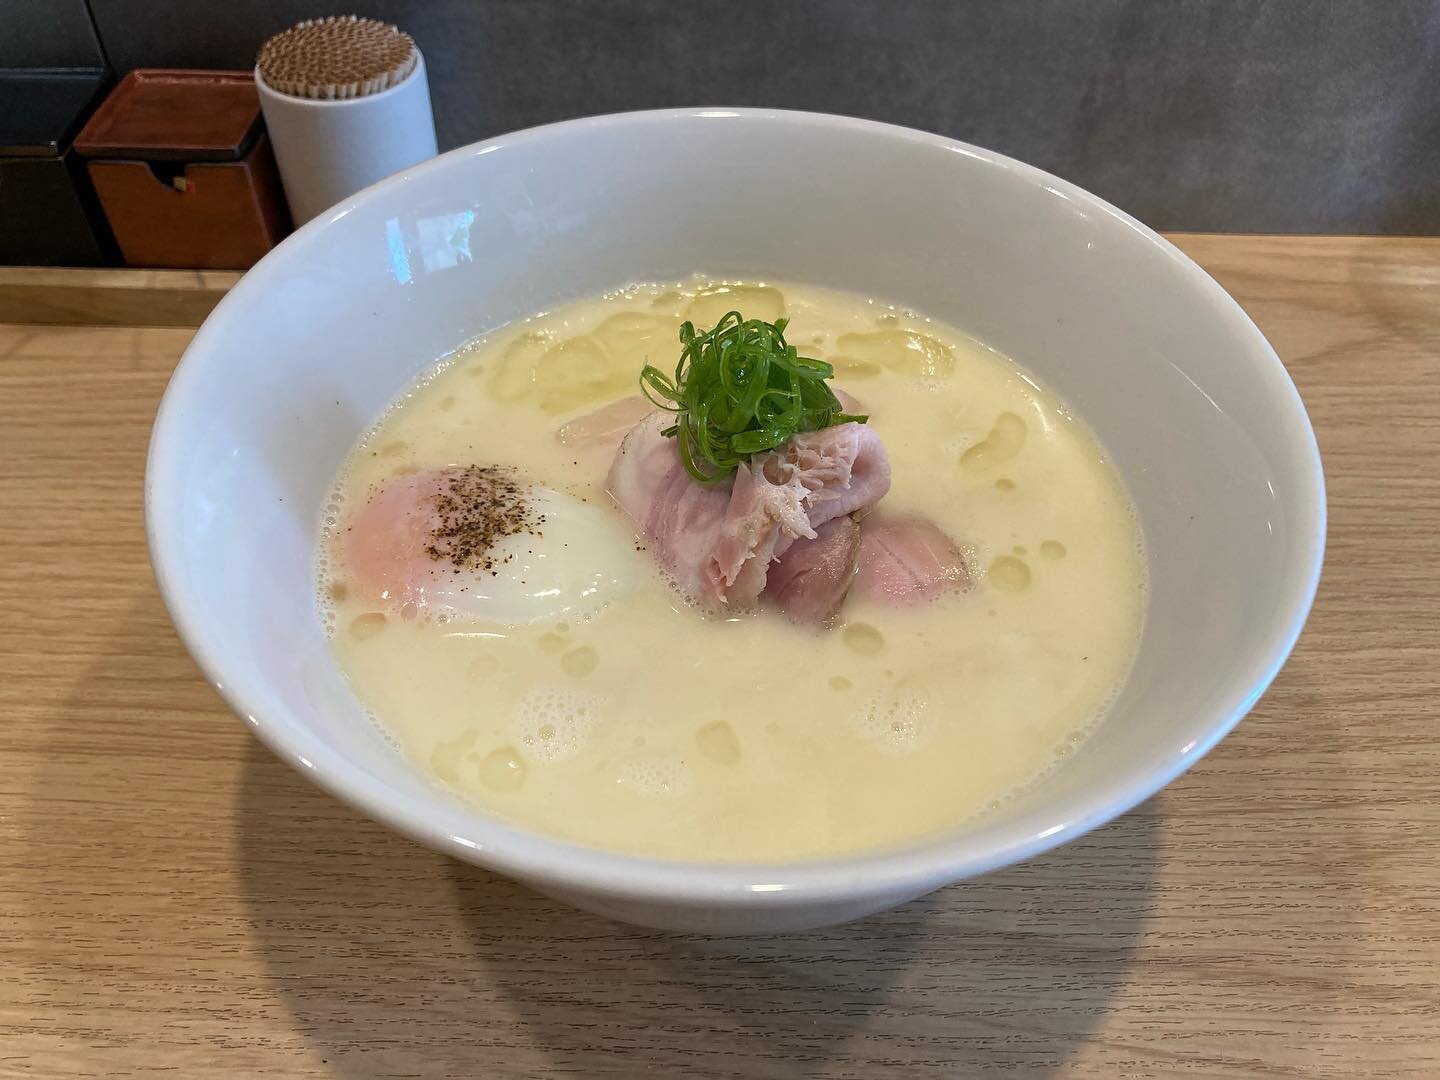 White truffle oil tori paitan at Ramen Maikagura in Chitose-Funabashi @maikagura_japan 
Maikagura has been on my list for a long time and I have put it off for a long time due to the allegedly super long lines. However, the lines are currently pretty